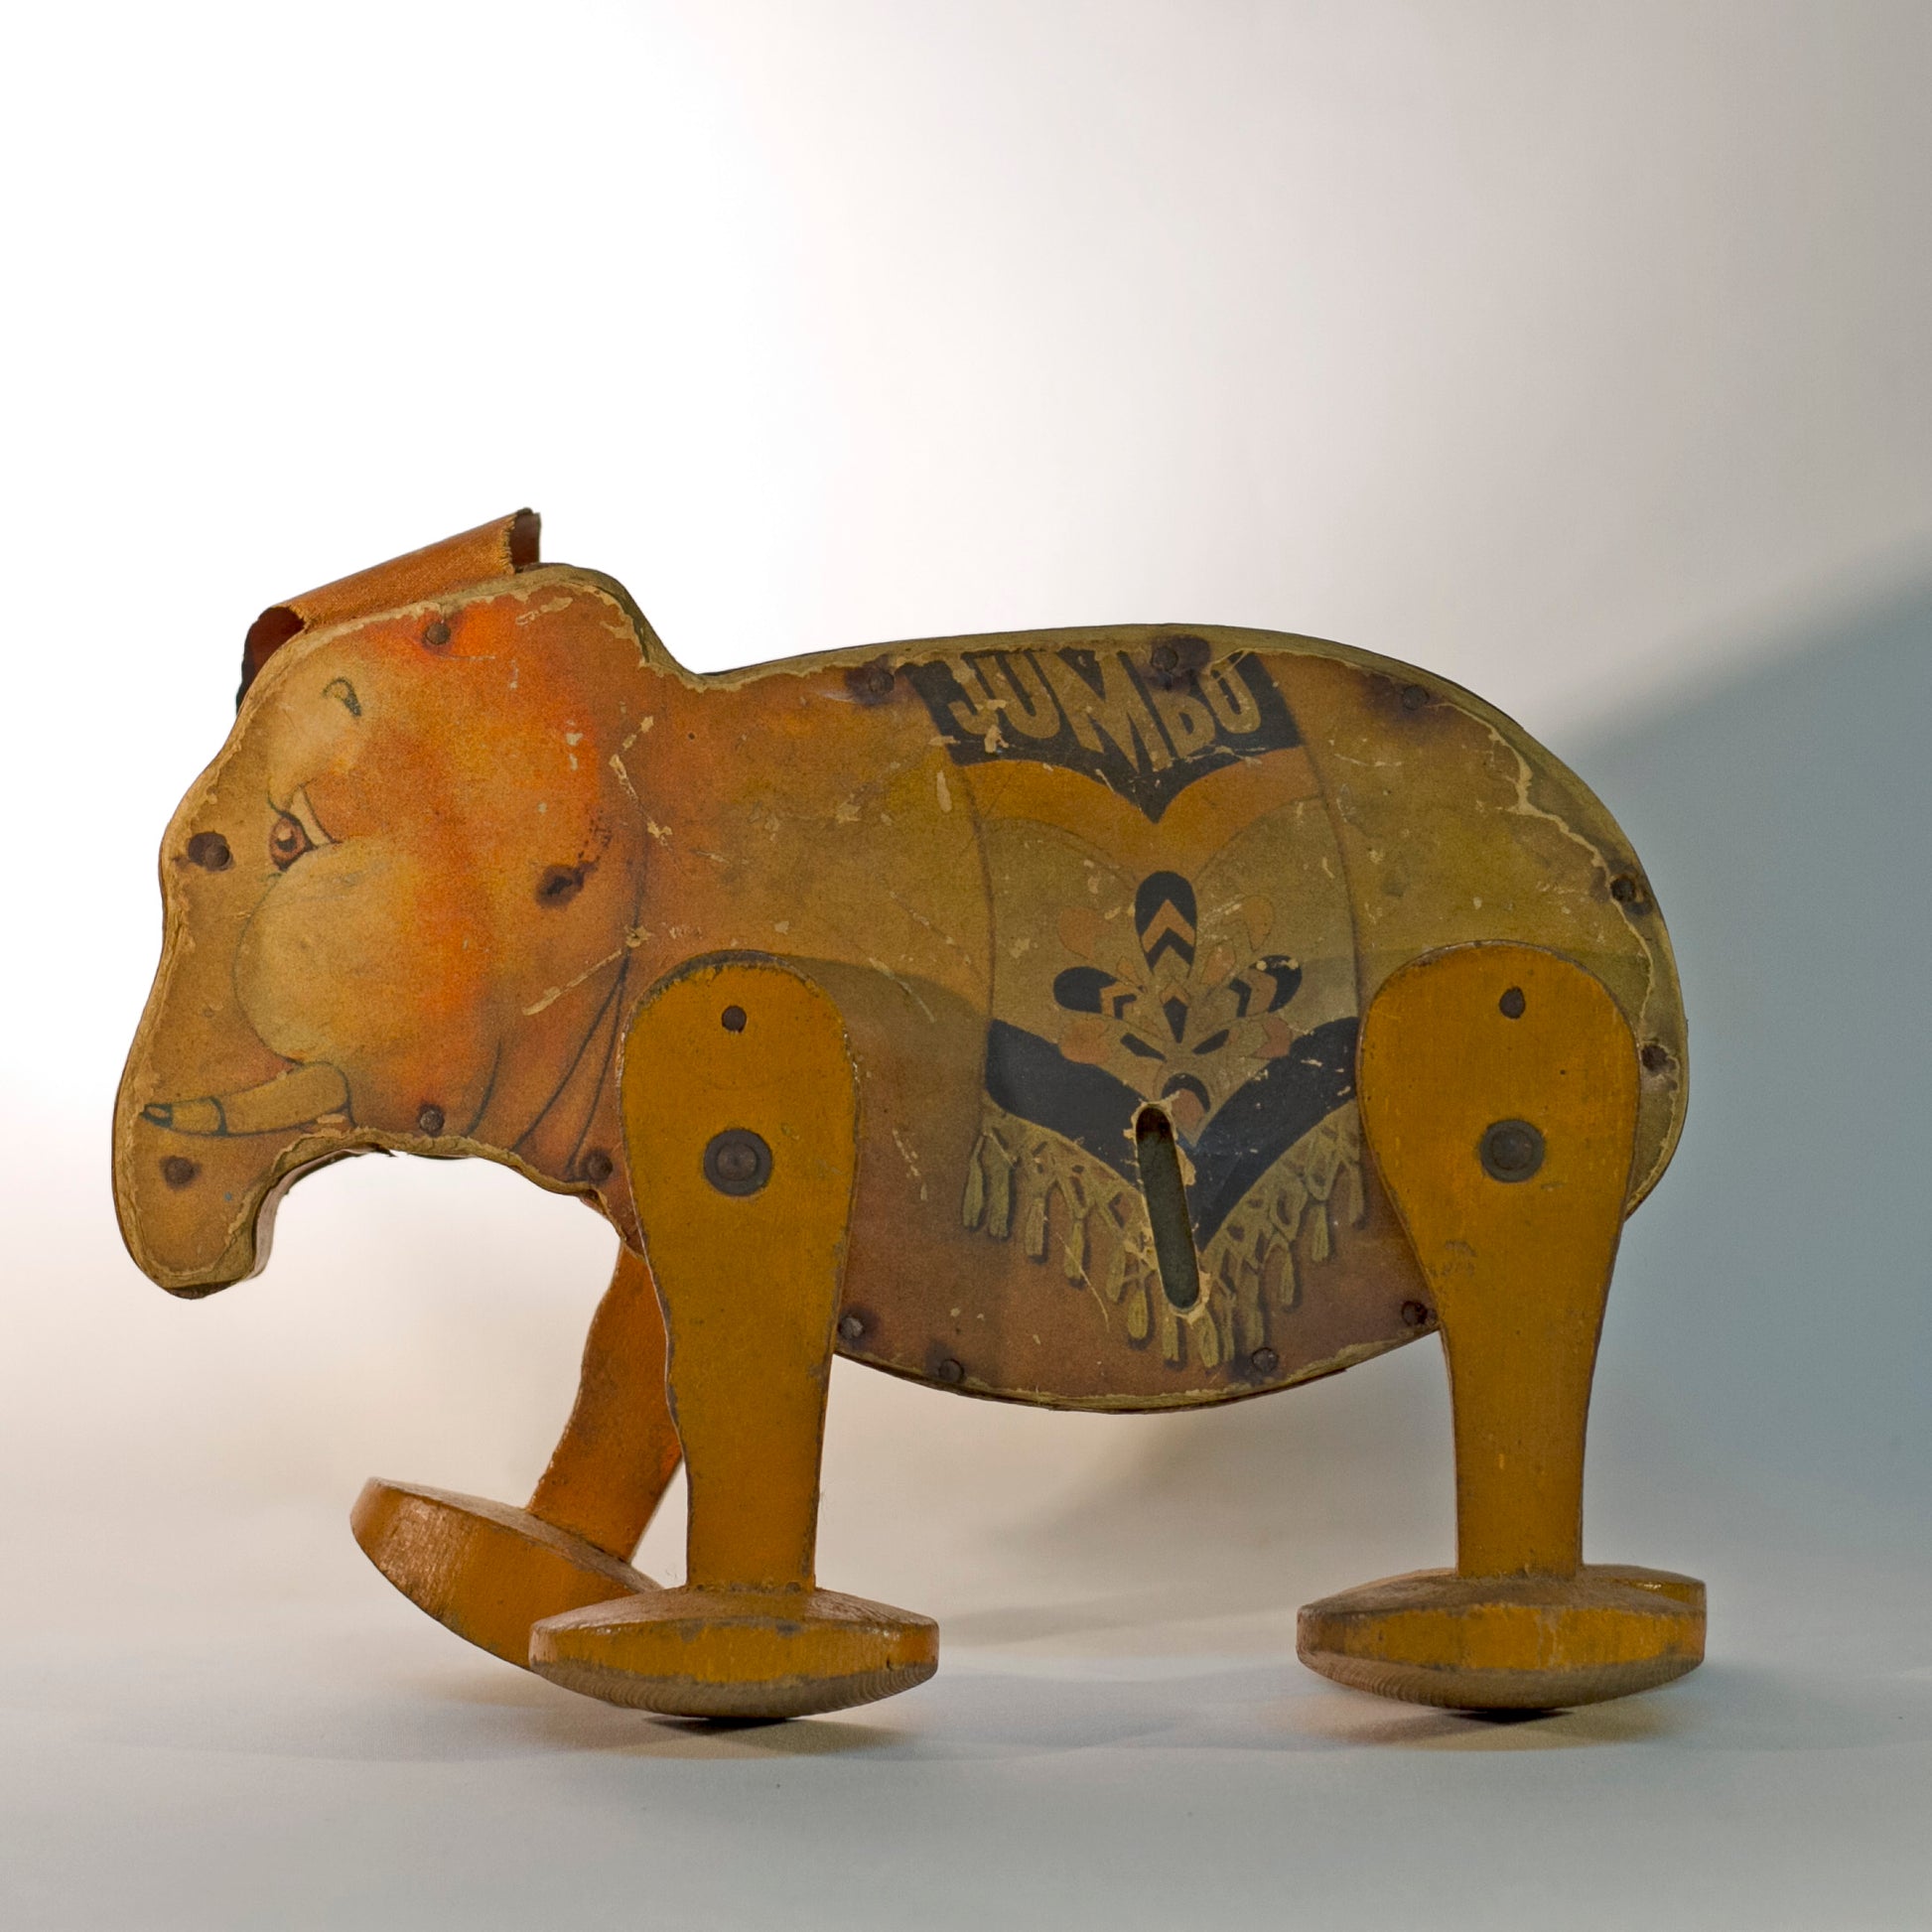 GO 'N' BACK JUMBO was one of the first Fisher Price toys. The paper lithograph decorated wooden wind-up orange elephant with circus blanket, orange oilcloth ears, and four wooden legs was offered in 1932 by Frank Tea & Spice Company of Cincinnati, Ohio as an advertising toy for its JUMBO brand peanut butter. Rare Find!